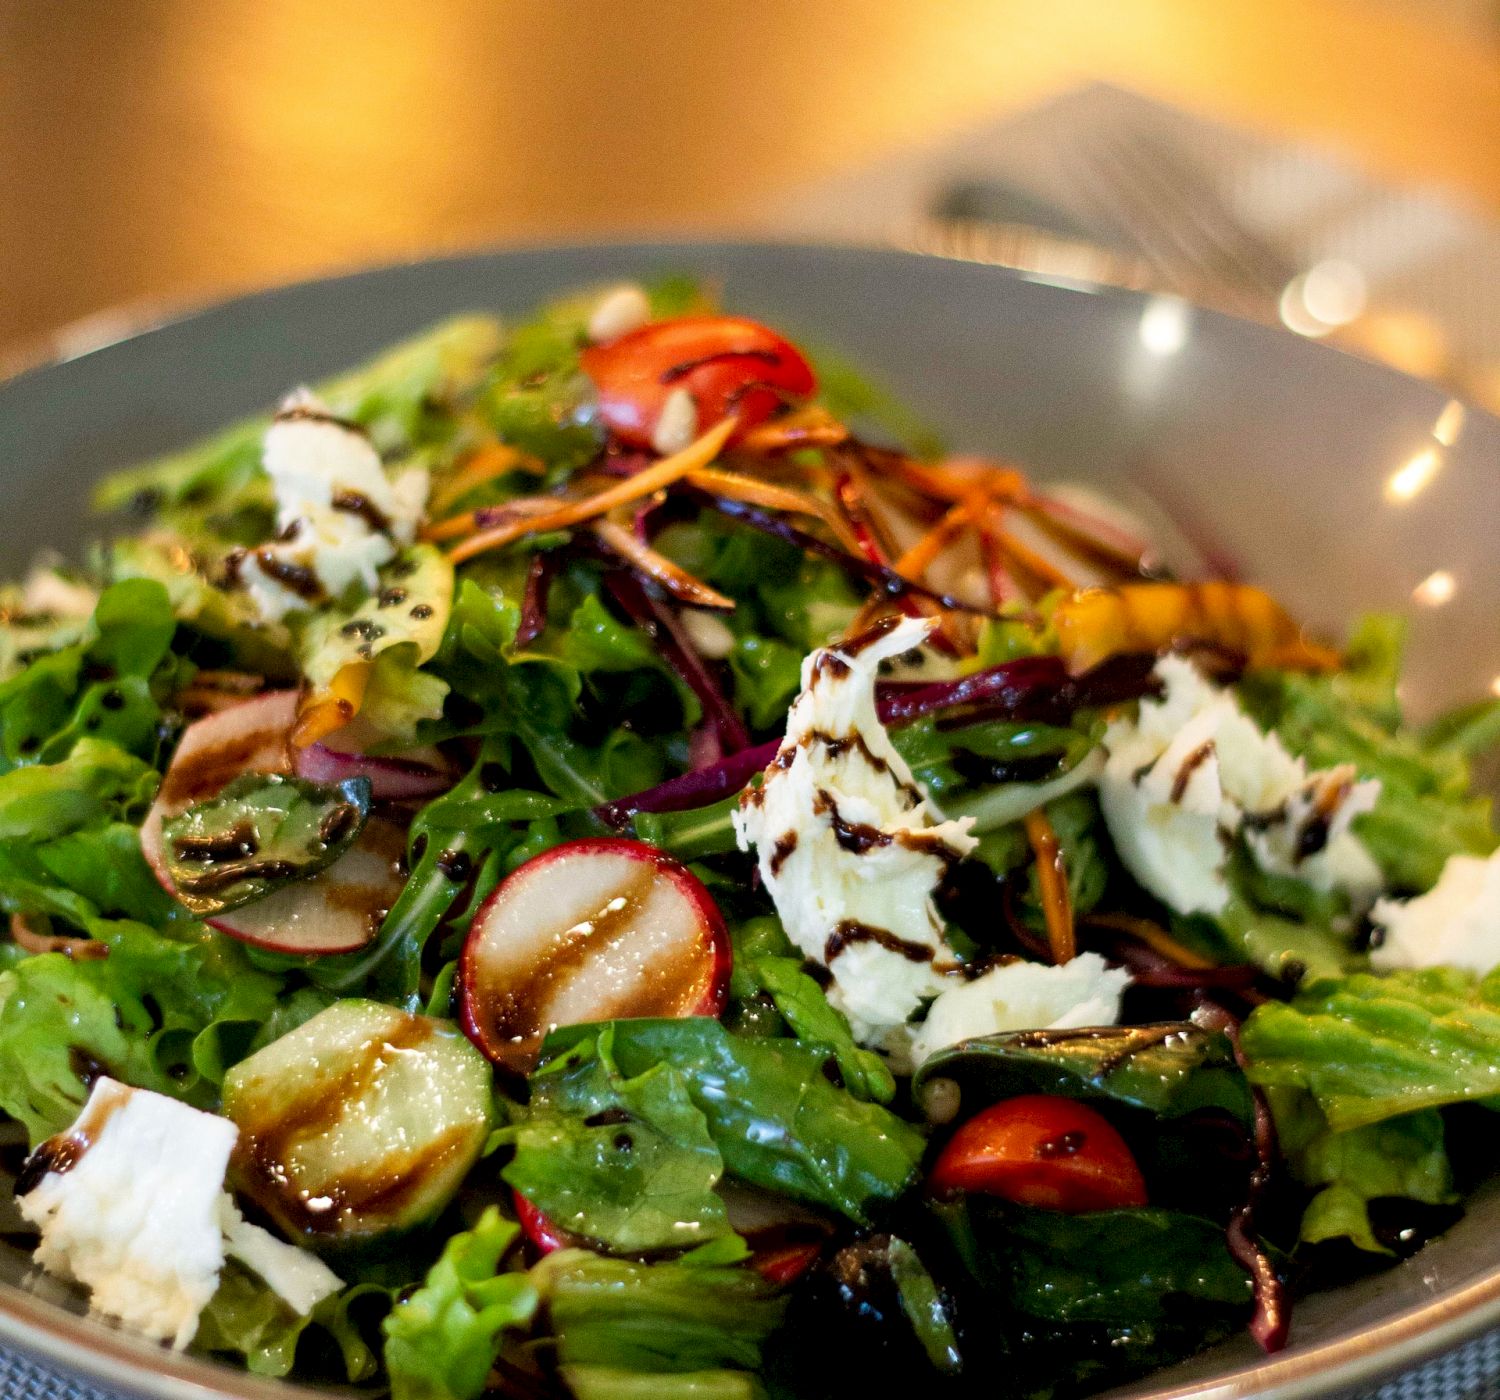 A mixed green salad with cherry tomatoes, sliced vegetables, and cheese, drizzled with a balsamic glaze, served in a gray bowl.